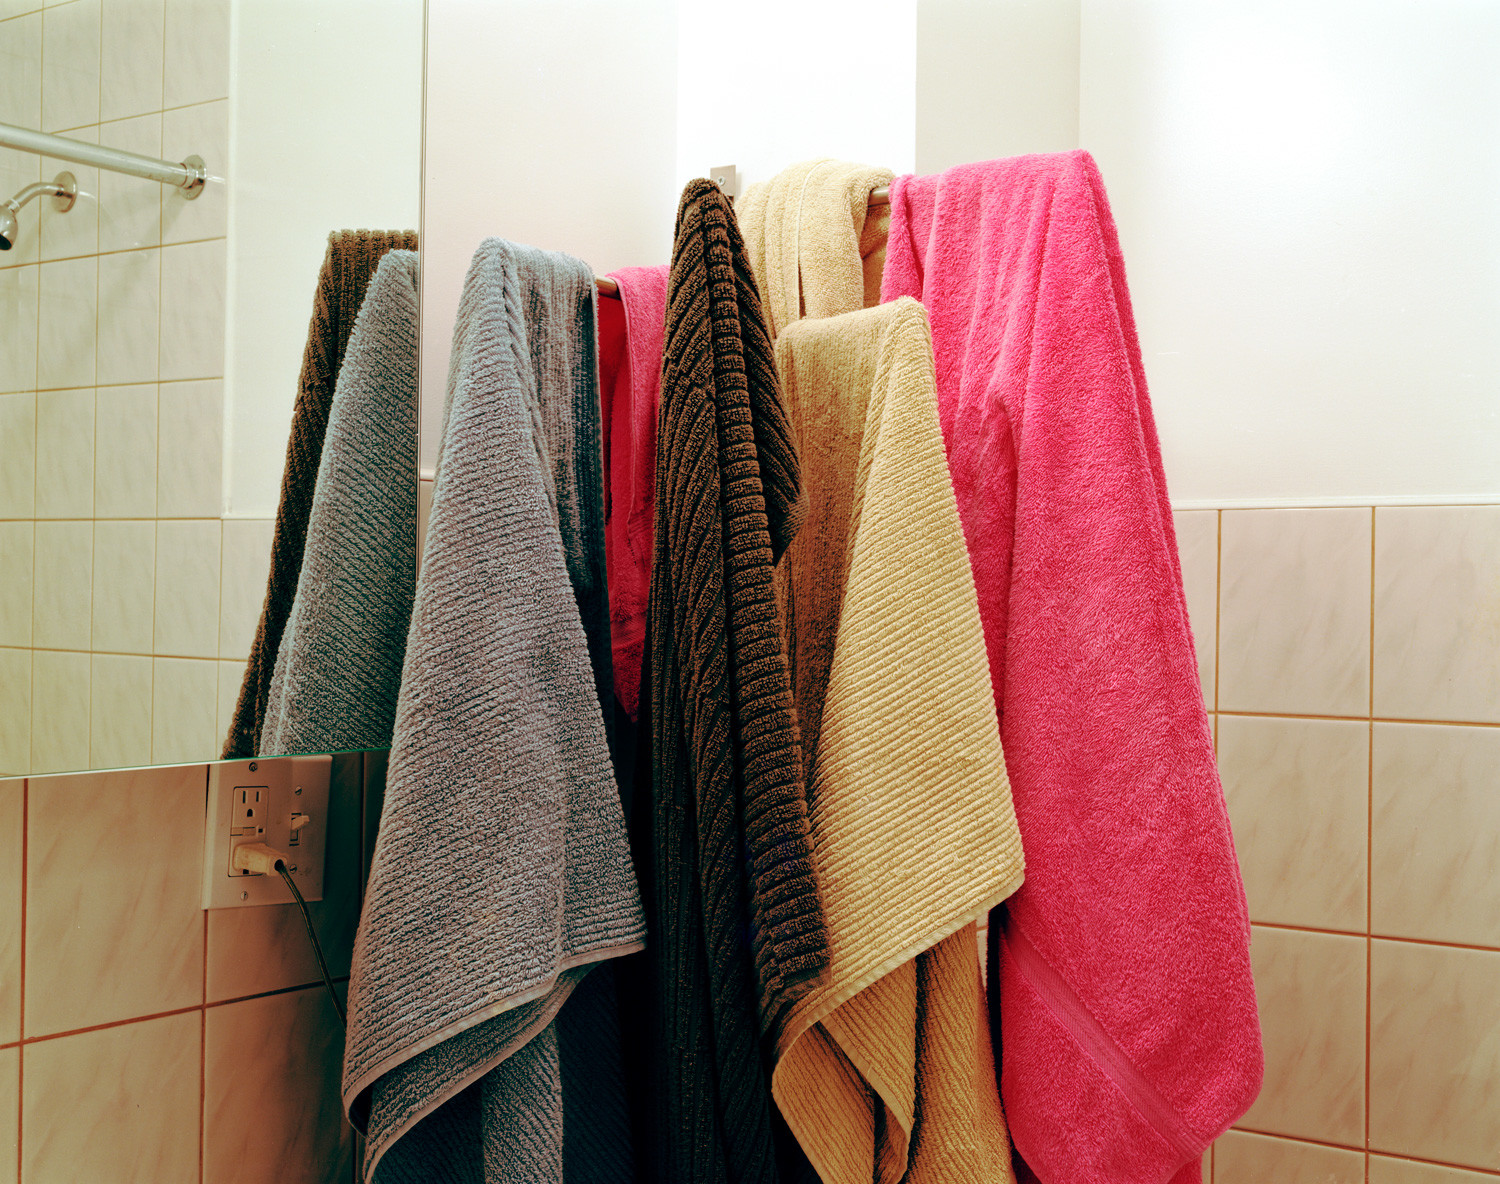 For some, sharing their towel with guests is not a problem but, for others, it is akin to sharing underwear. 